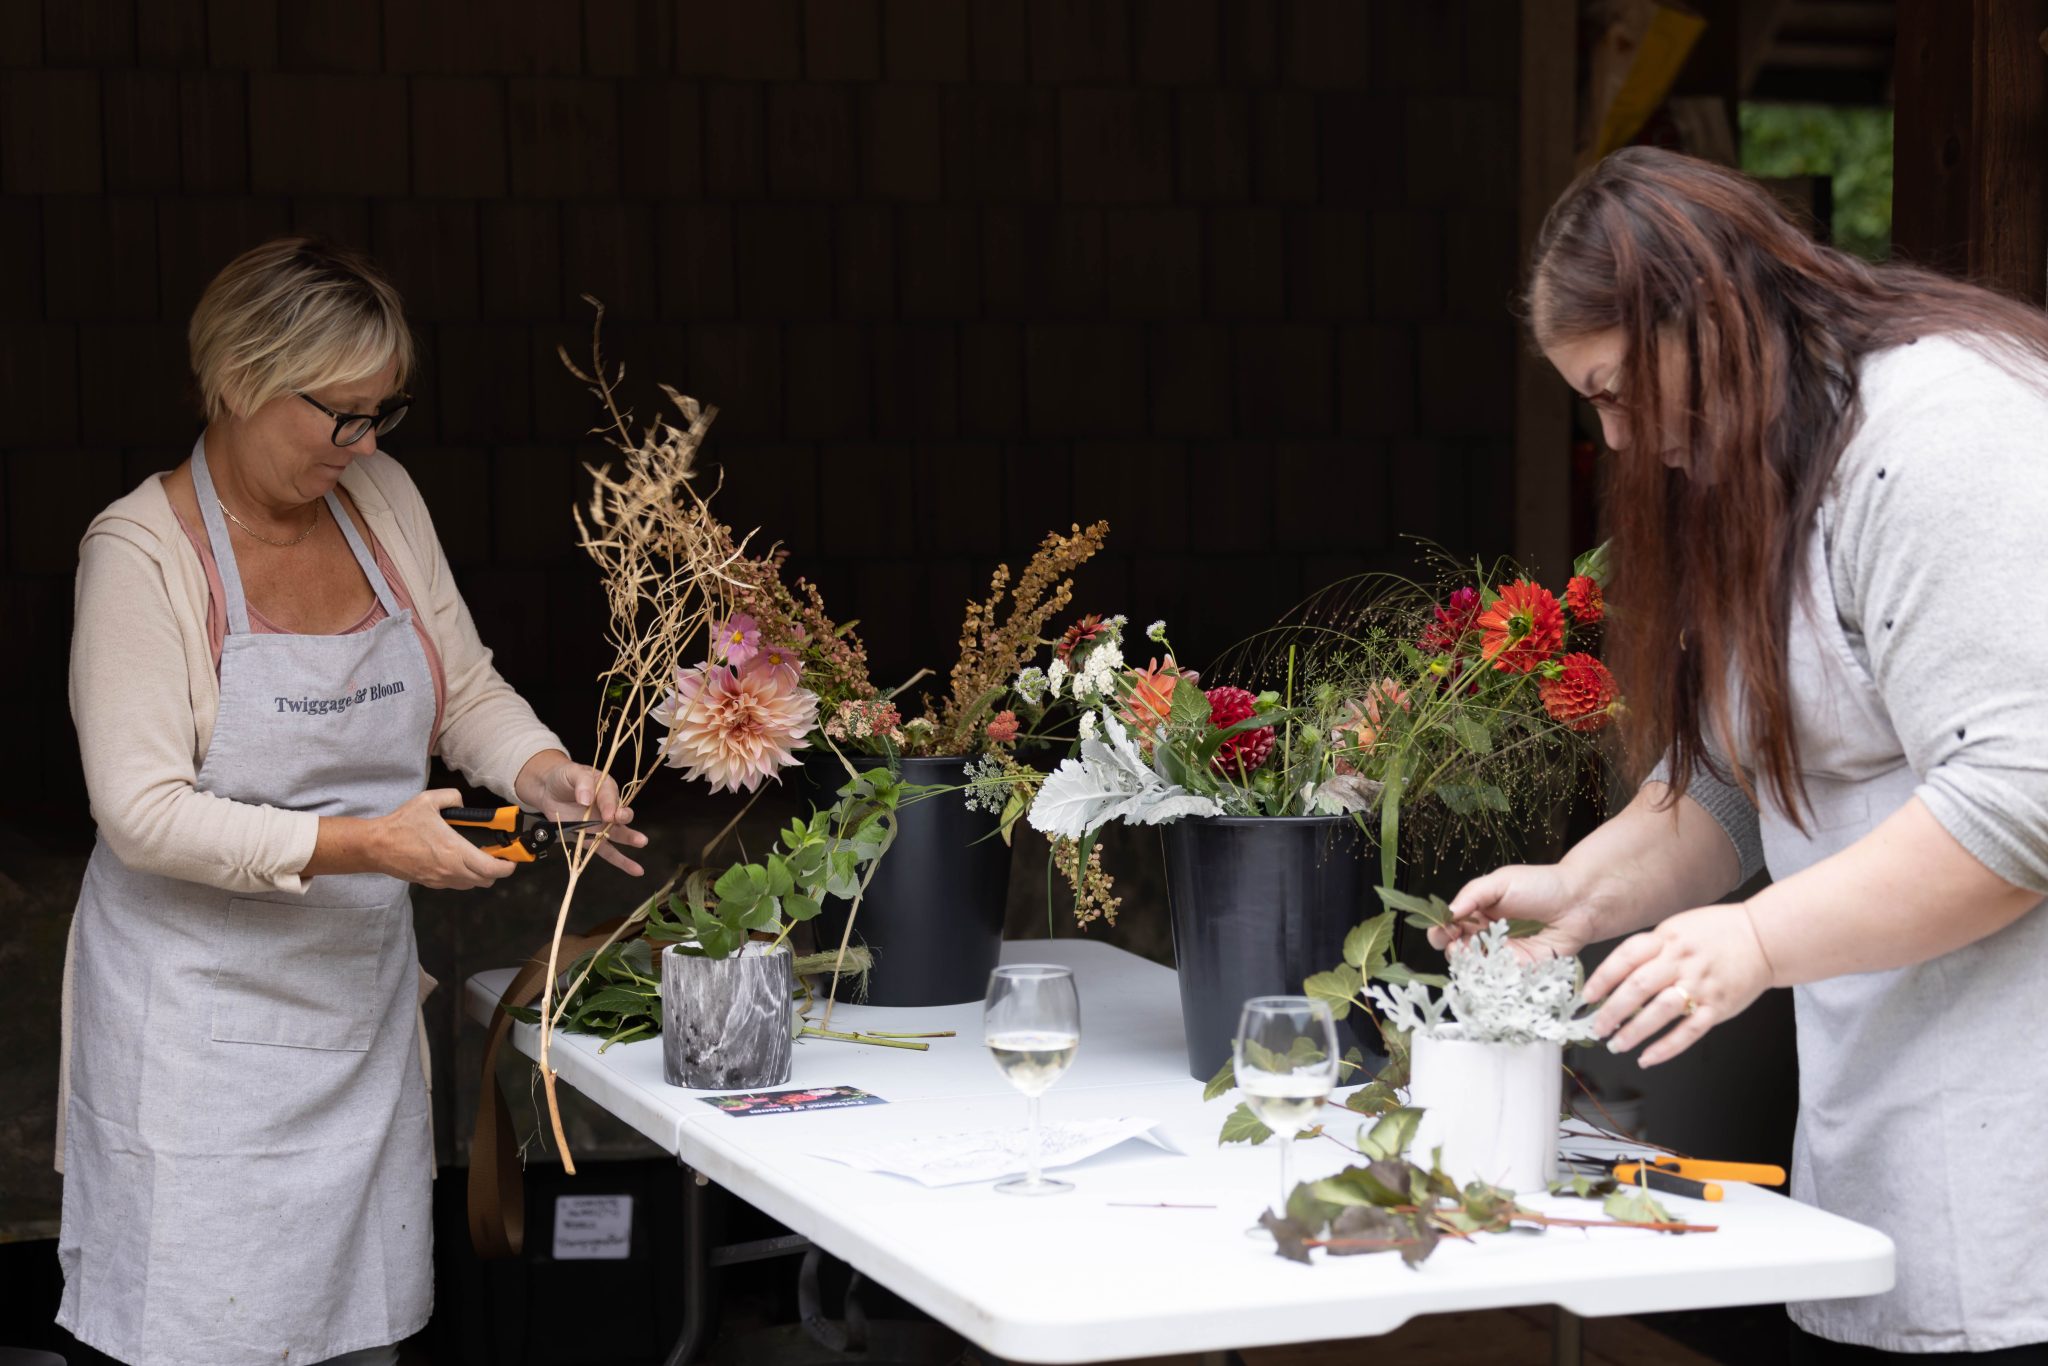 Workshop participants work with flowers at a table.